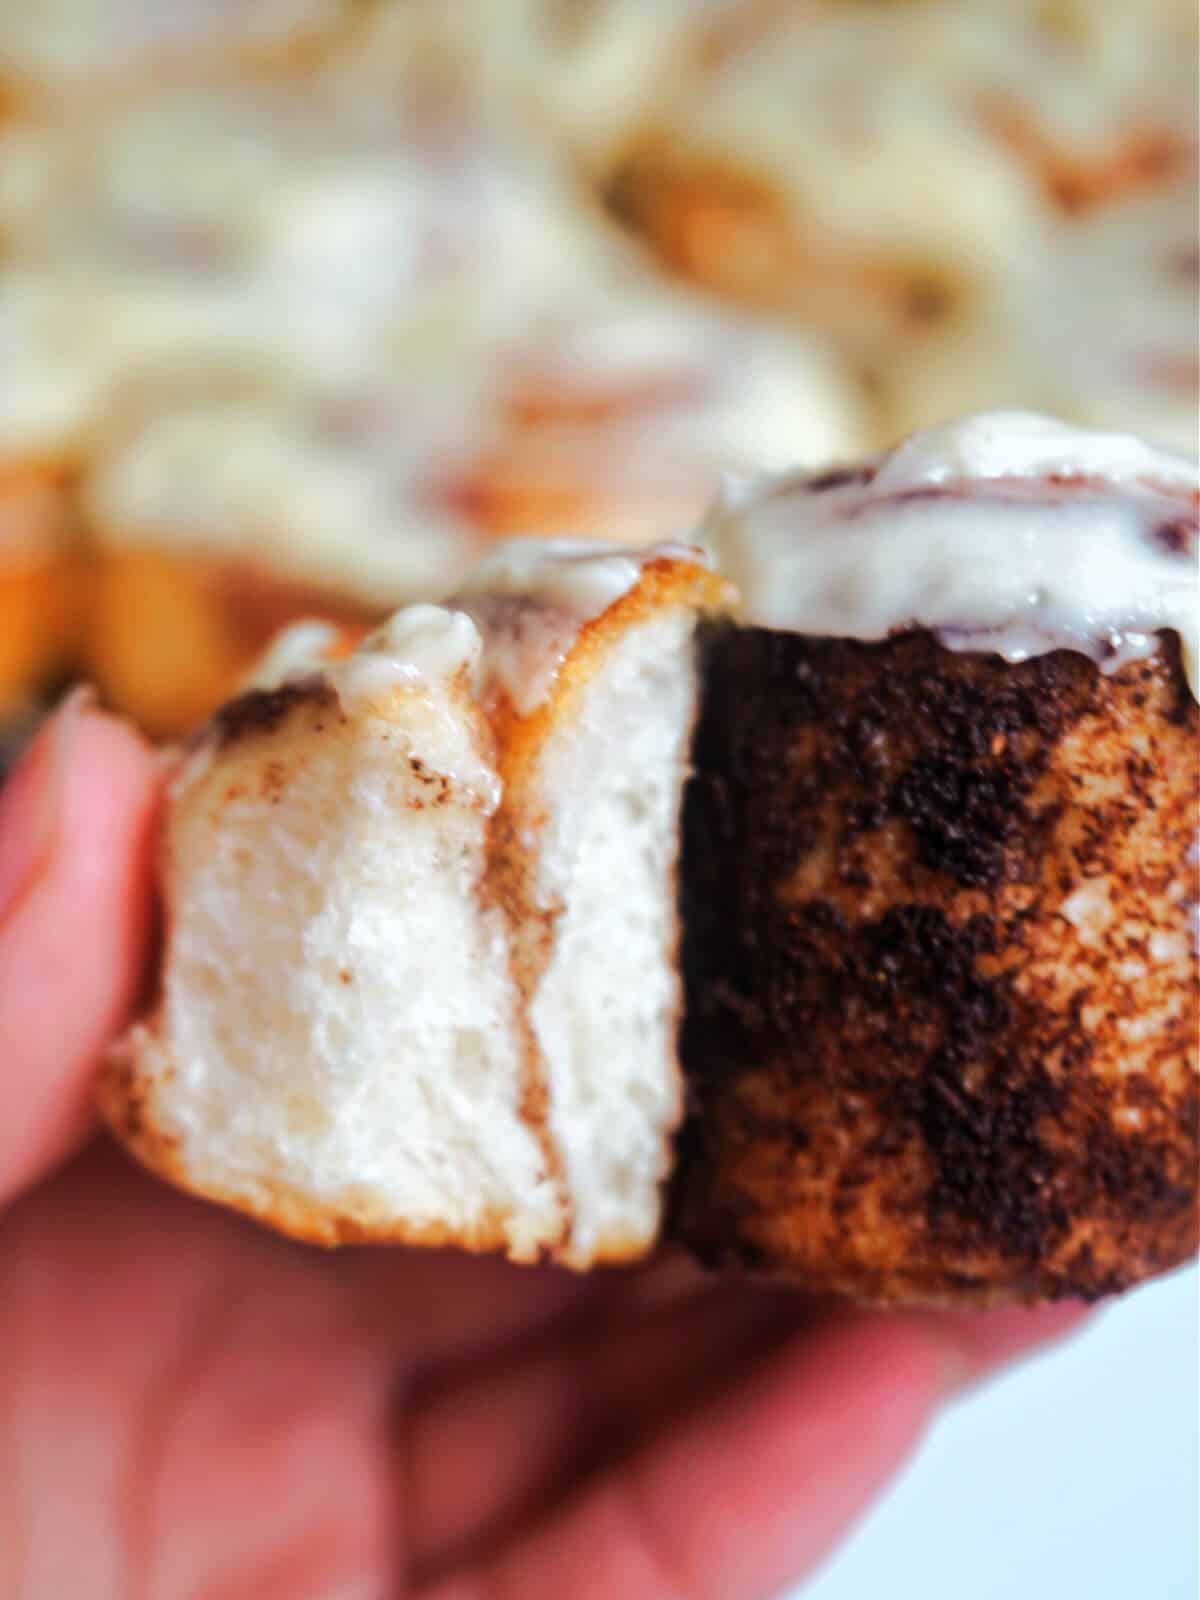 Half of a cinnamon roll to show how fluffy is inside.